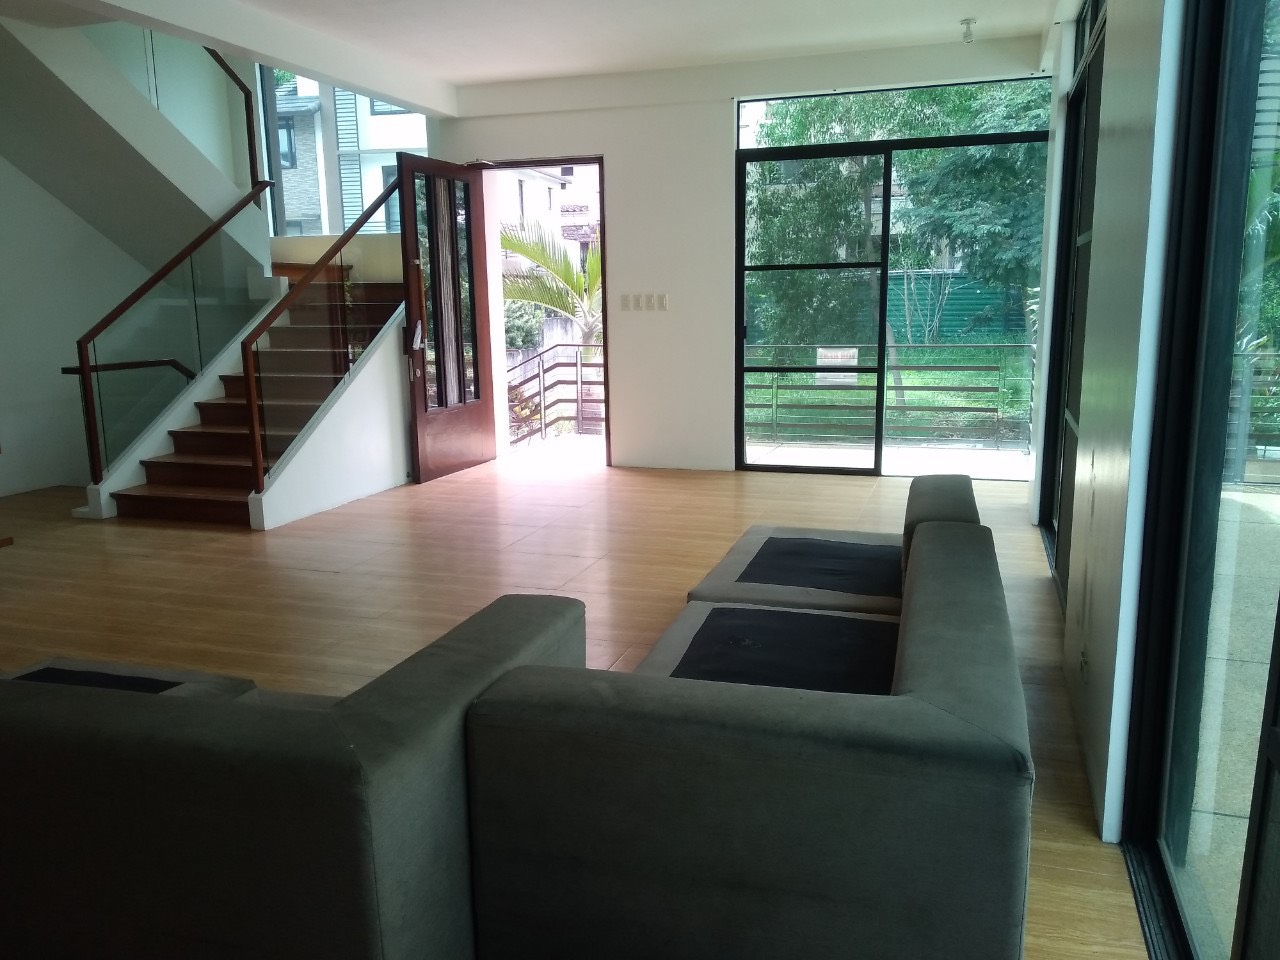 5 Bedrooms House For Rent, McKinley Hill Village 4